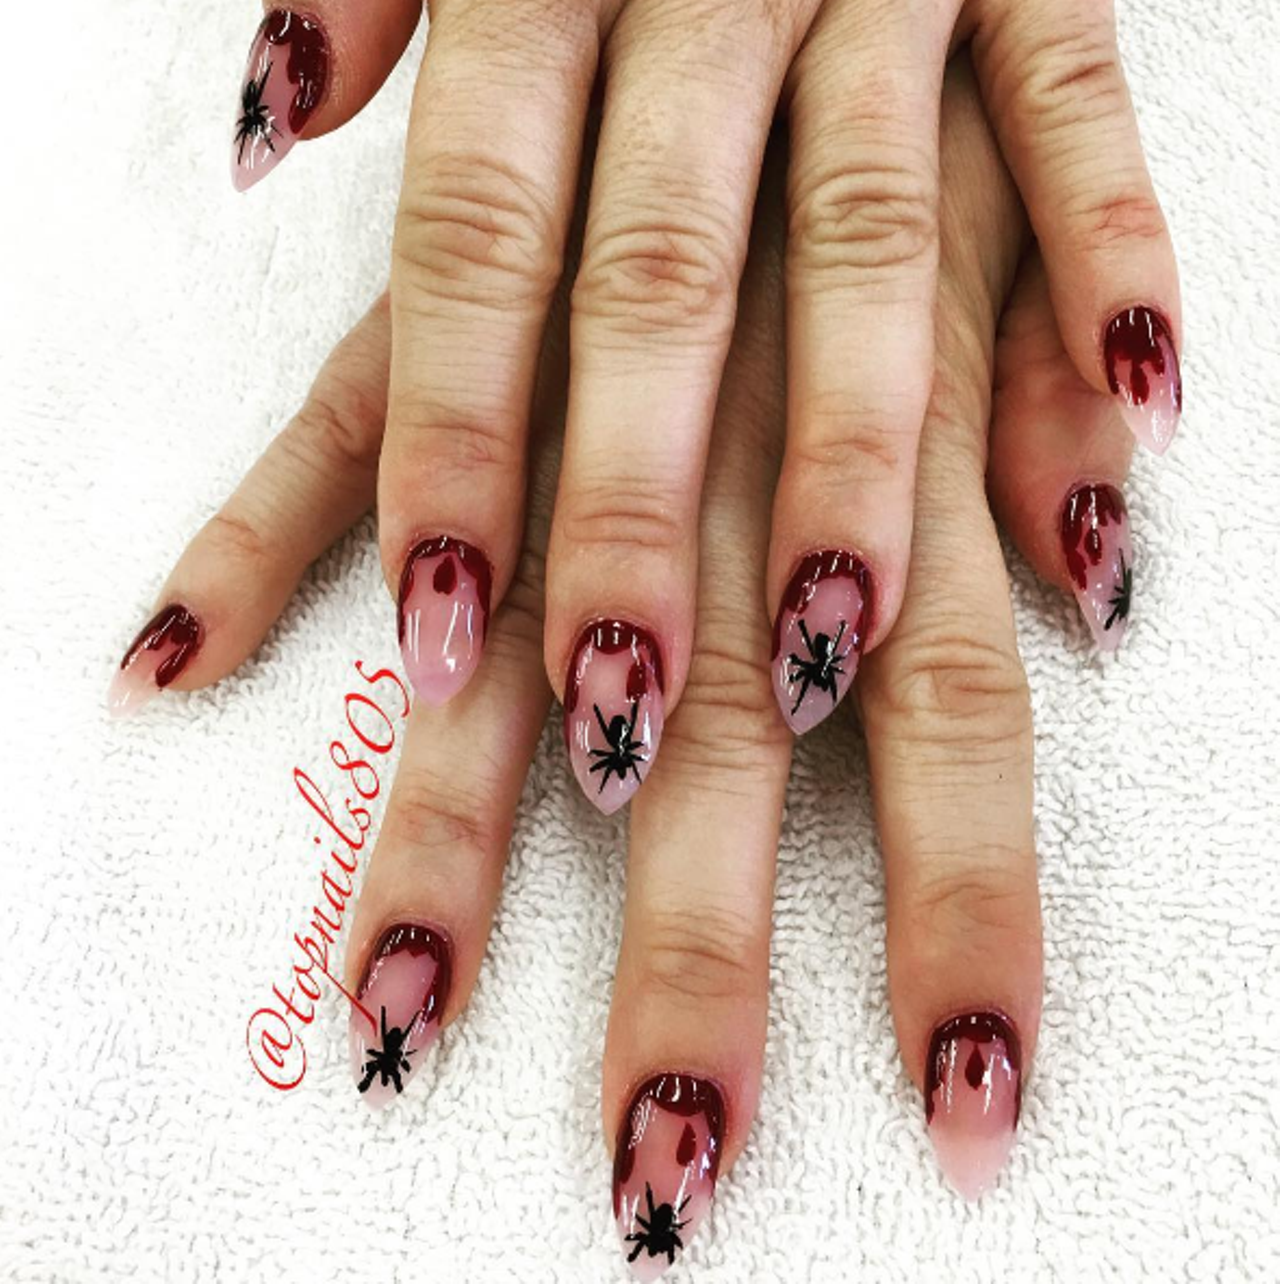 Blood and spiders by @topnails